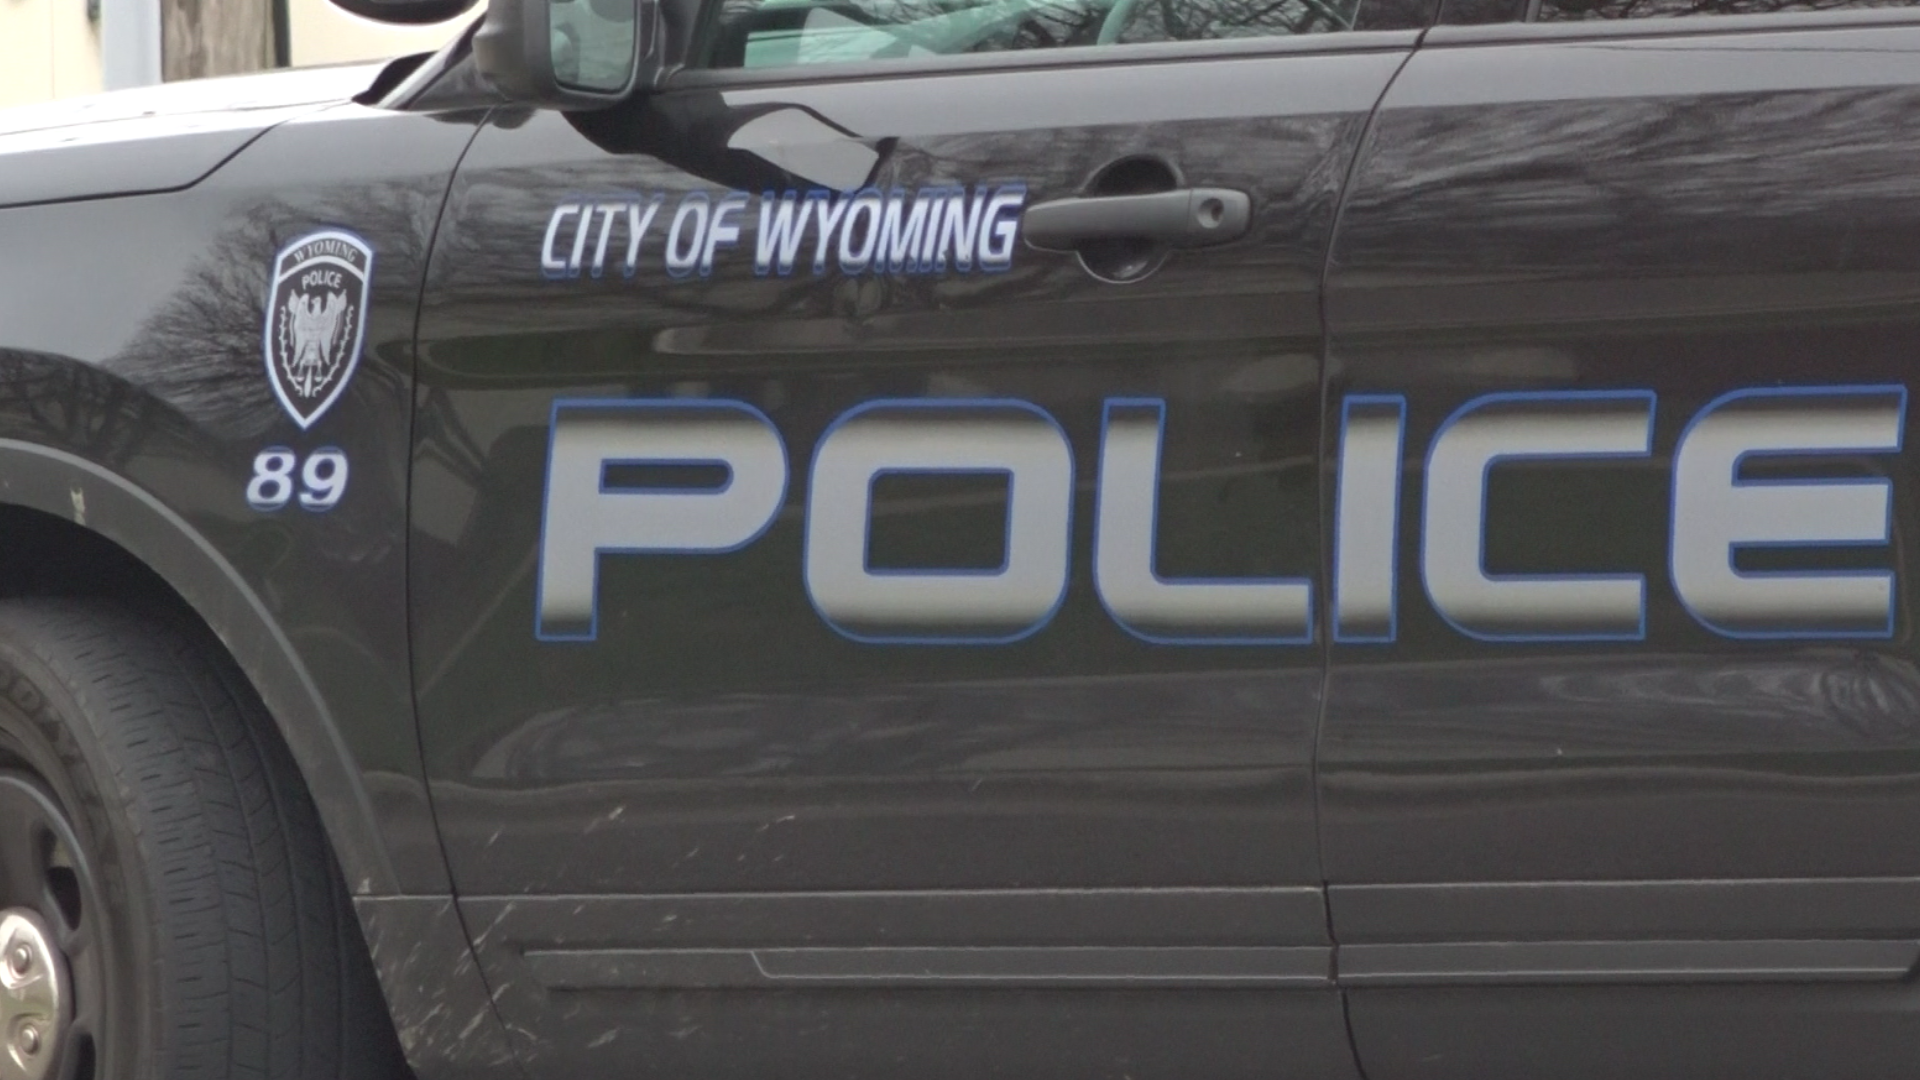 The victim has been identified as 34-year-old Cynthia Jean McCoy of Grand Rapids.